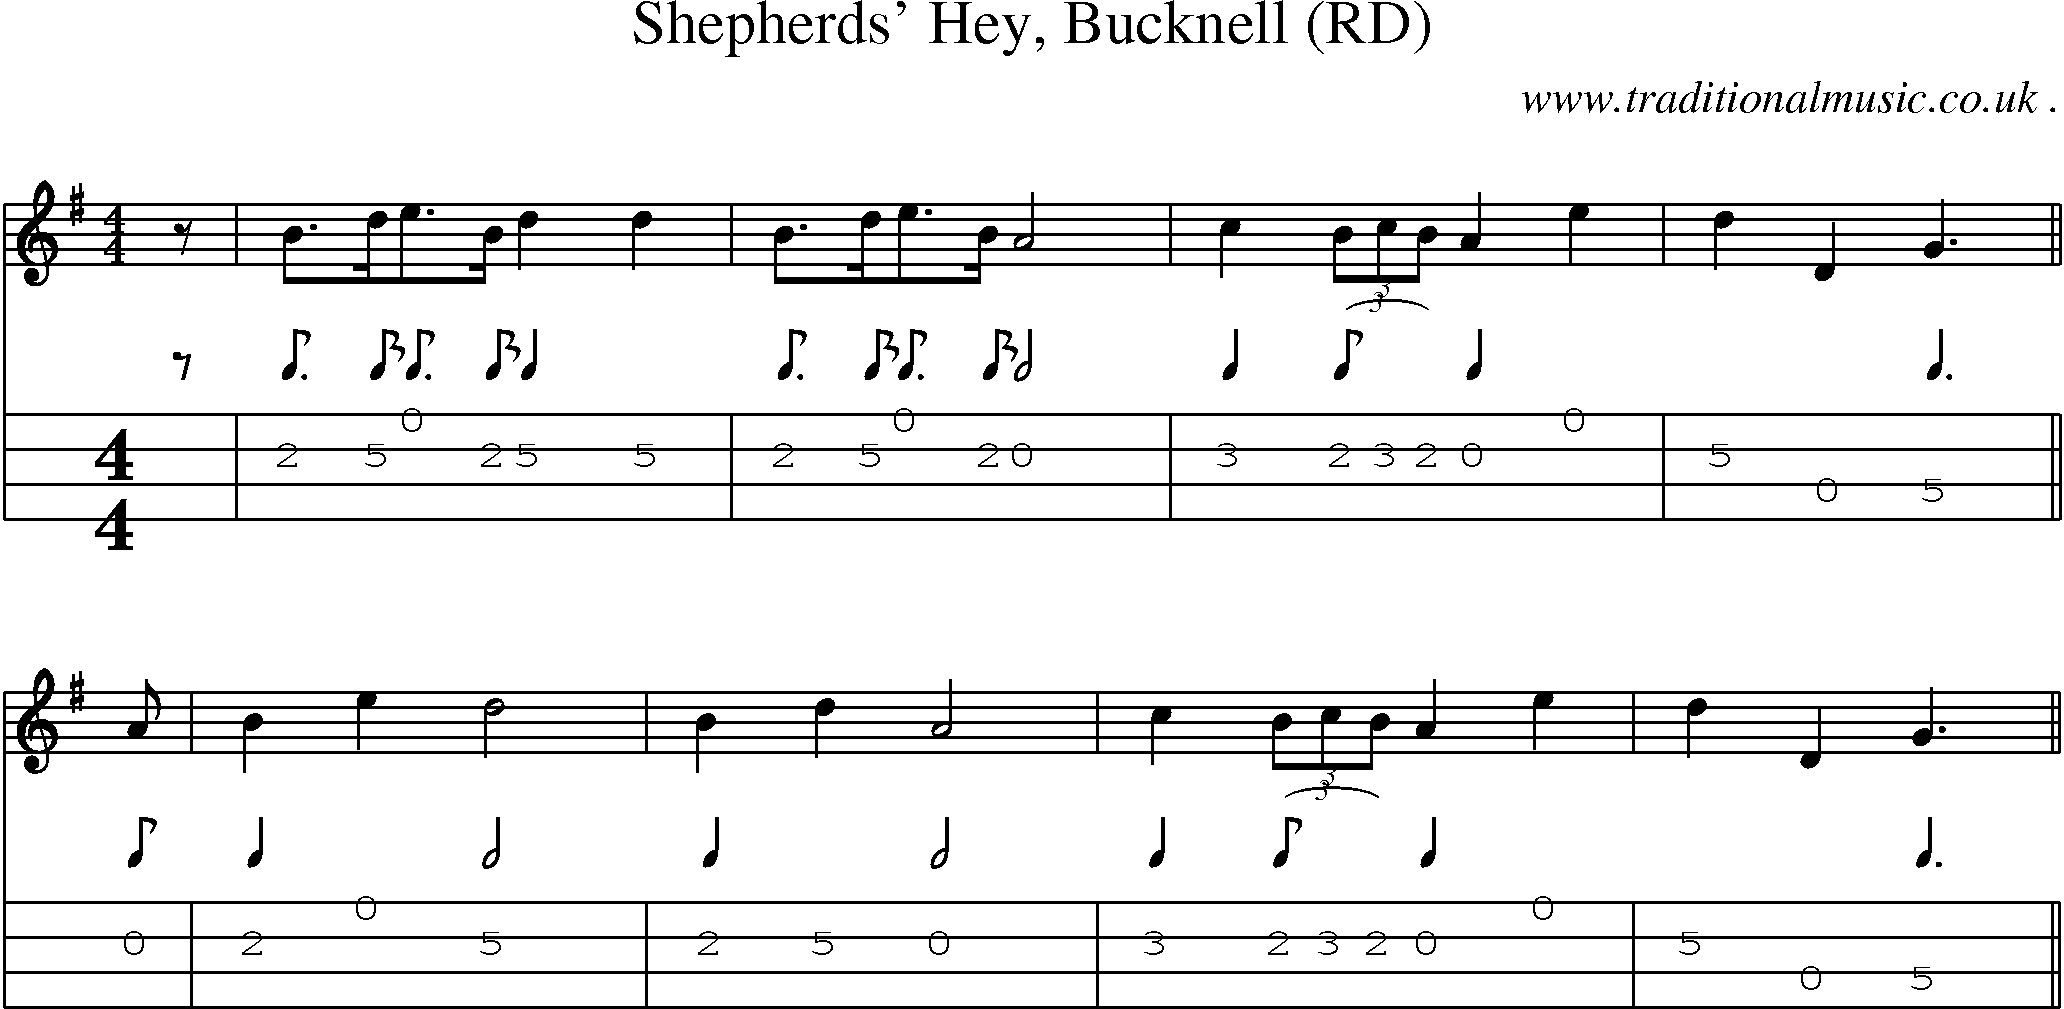 Sheet-Music and Mandolin Tabs for Shepherds Hey Bucknell (rd)